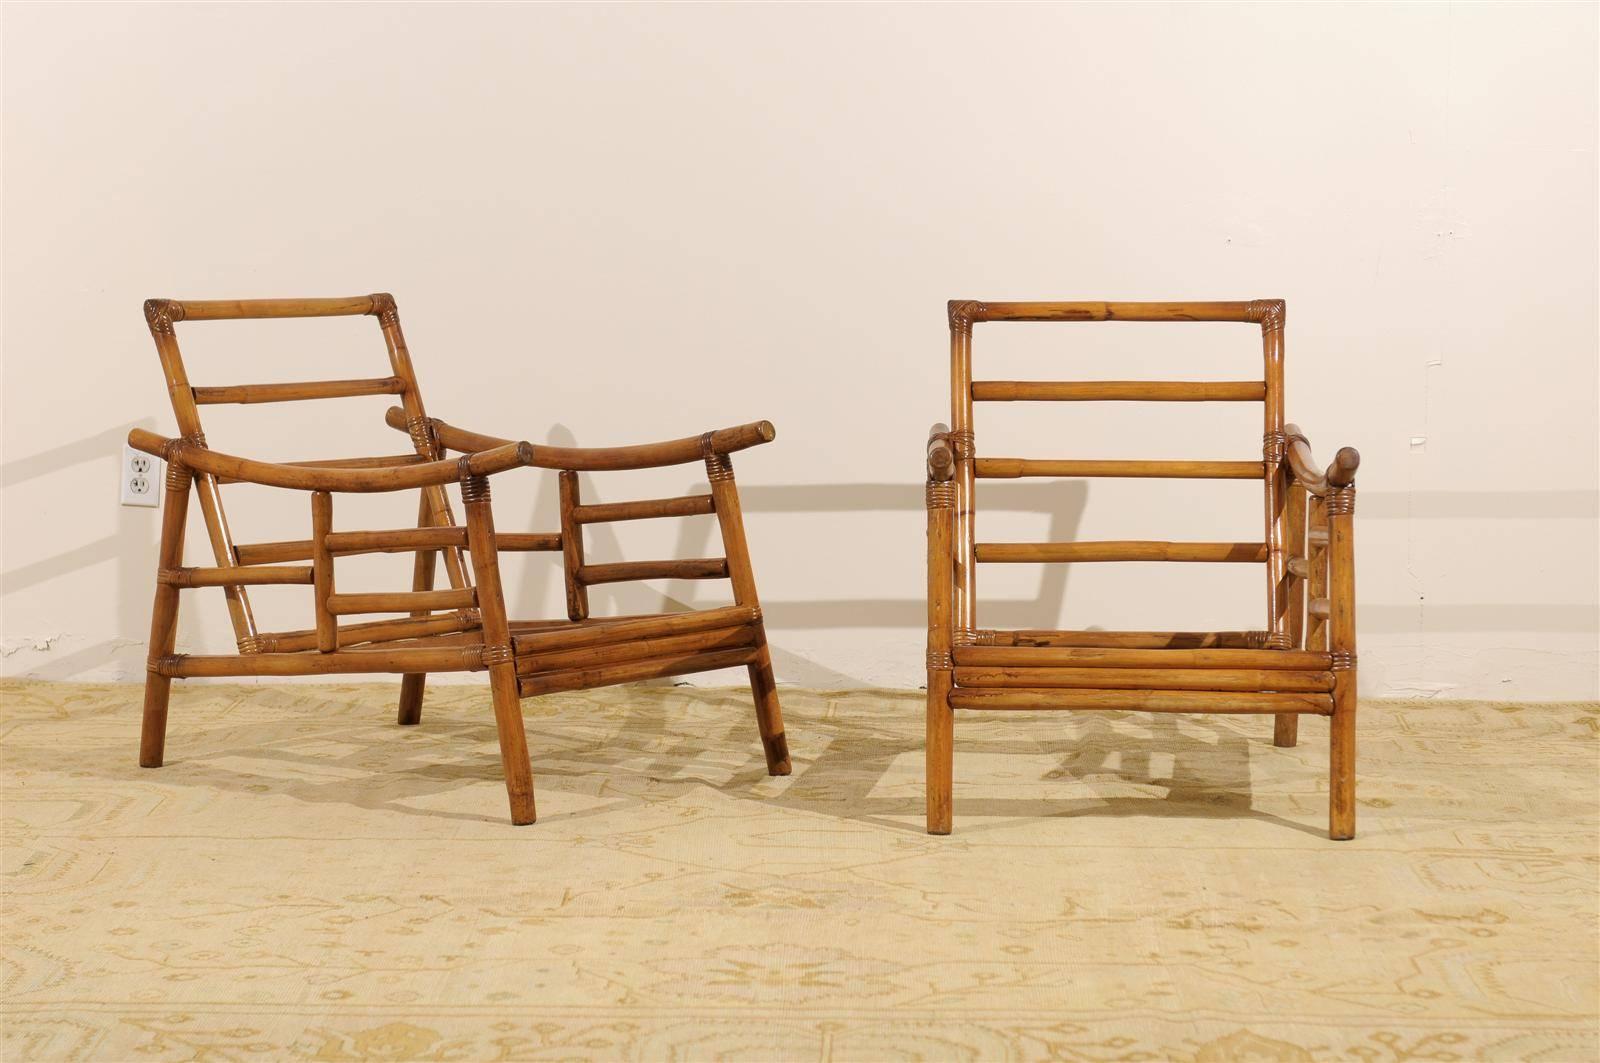 An exceptional pair from a difficult to find series of vintage Campaign style lounge chairs. Rattan and hardwood construction with beautiful raffia binding detail. Stout, comfortable and expertly made. Aged to absolute perfection ! These unusual